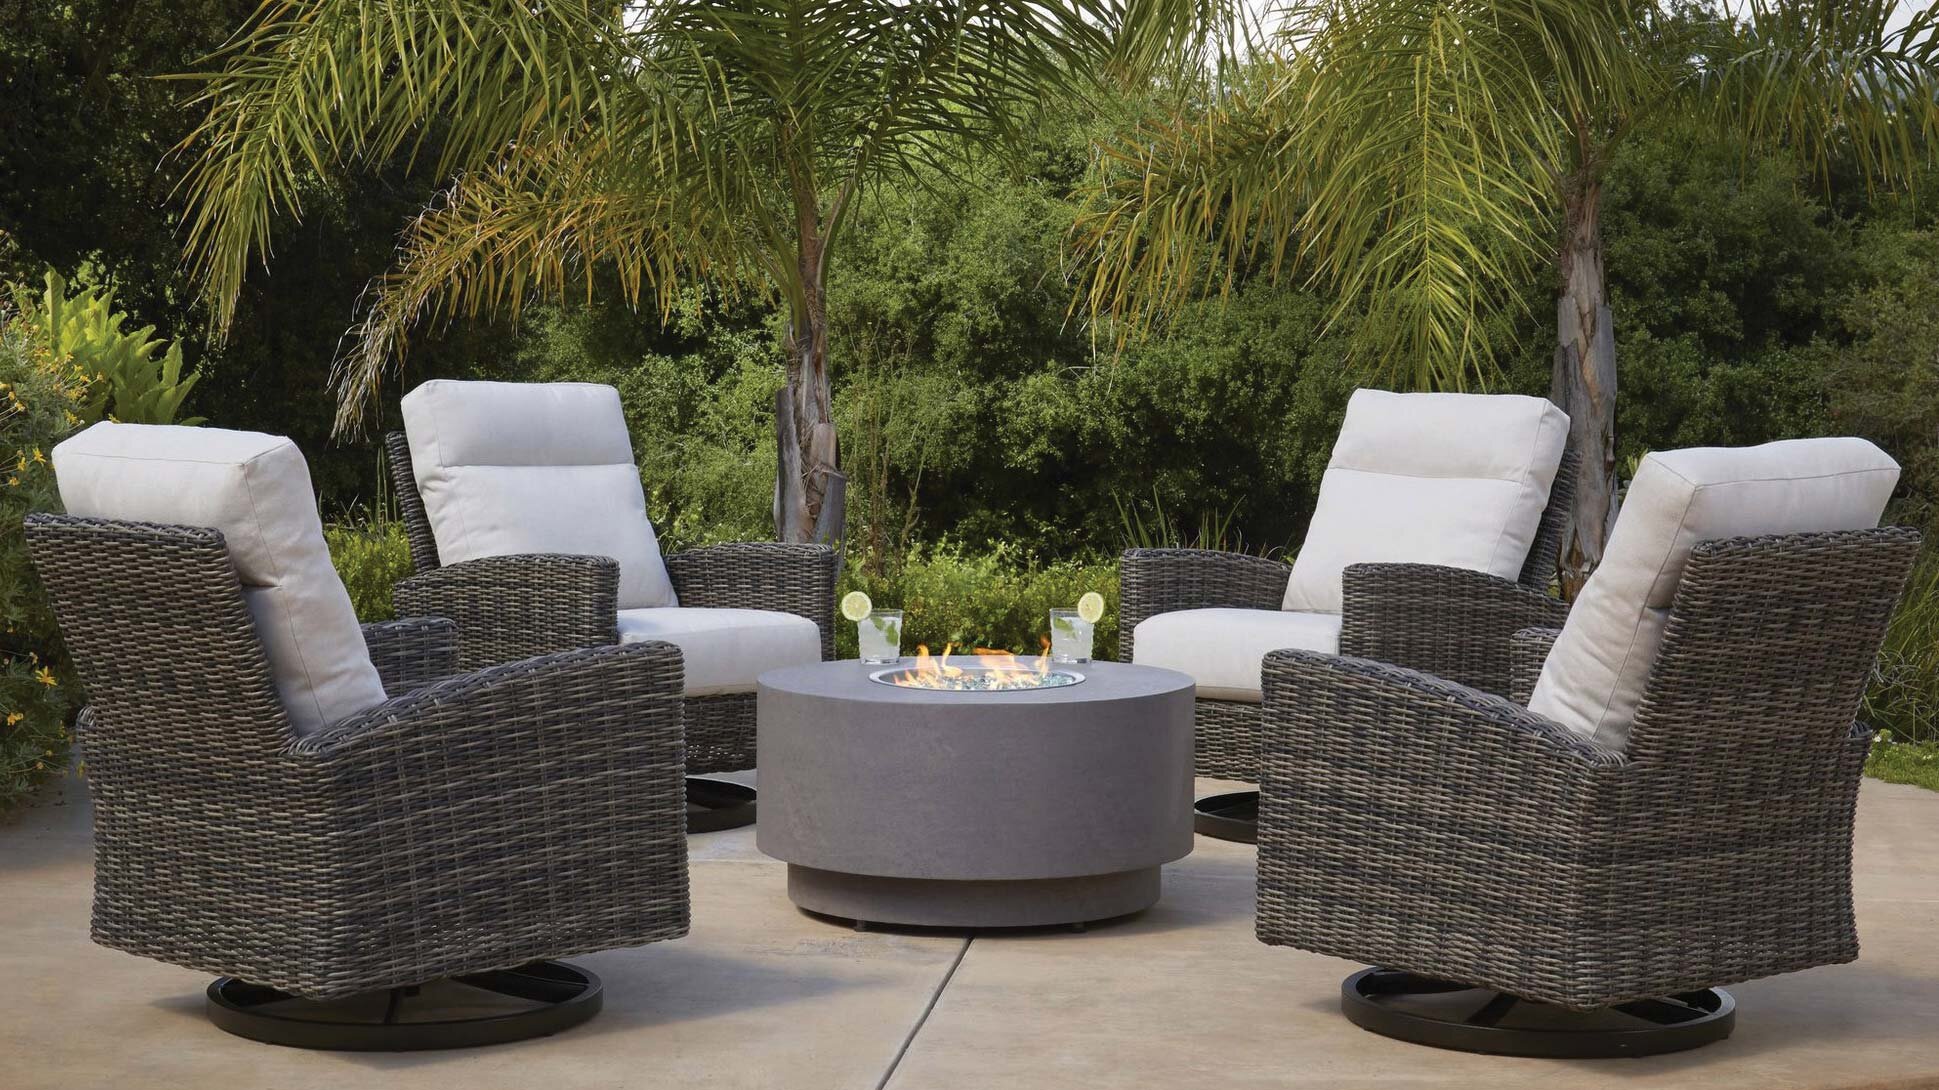 EUREKA Outdoor Furniture Collection — Oasis of Charlotte, NC Outdoor, Wicker & Patio Tubs, Big Green Egg Grills